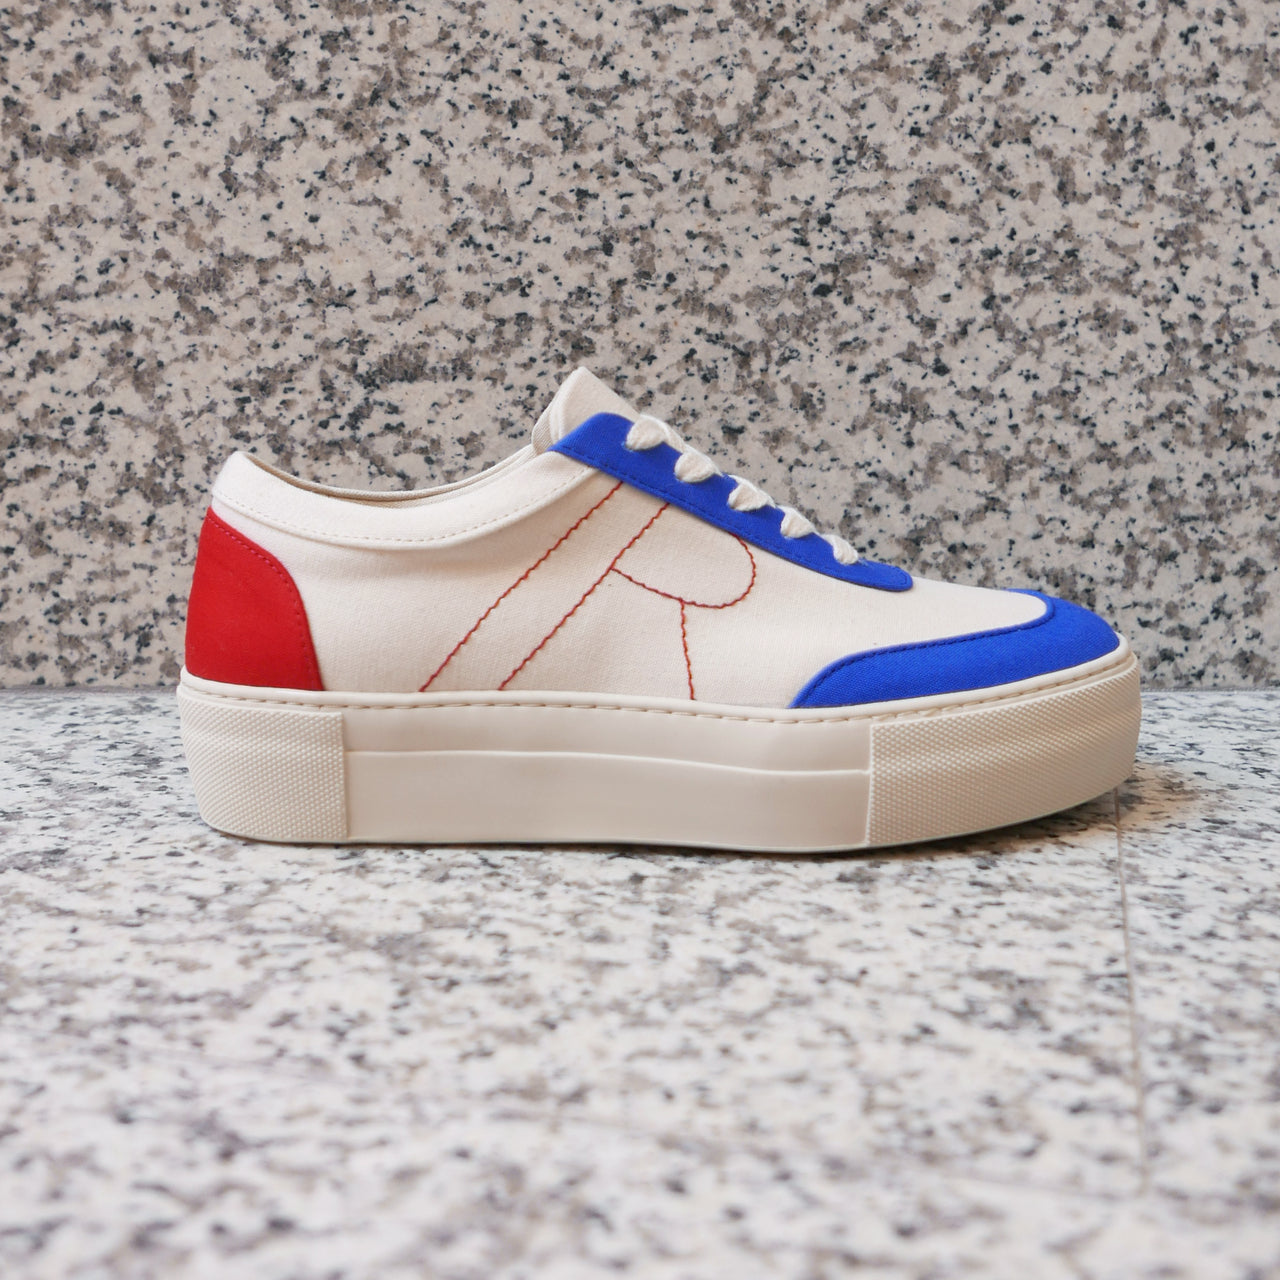 Bailey Sneakers in Blue & Red